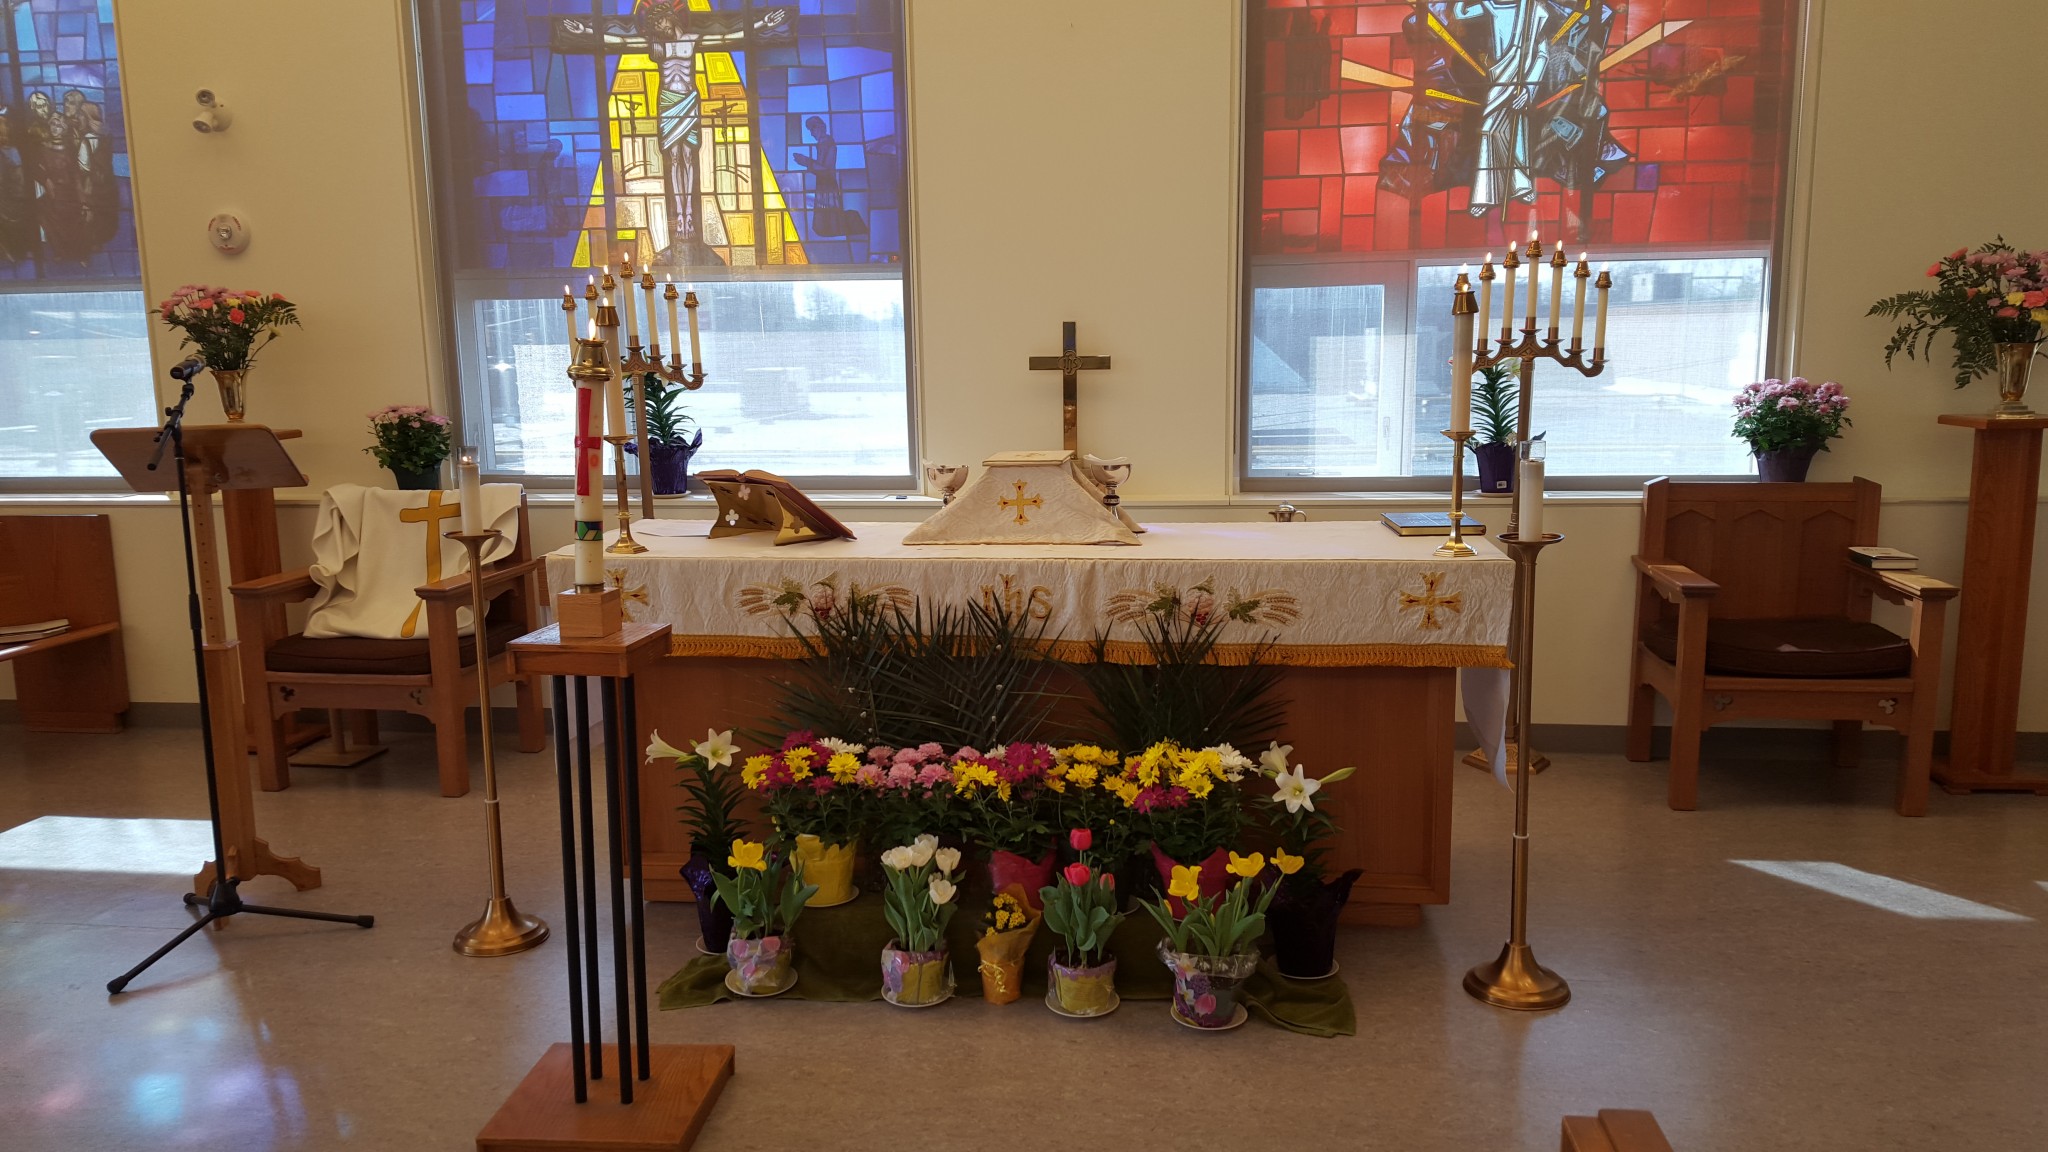 Fourth Sunday of Easter – May 3, 2020